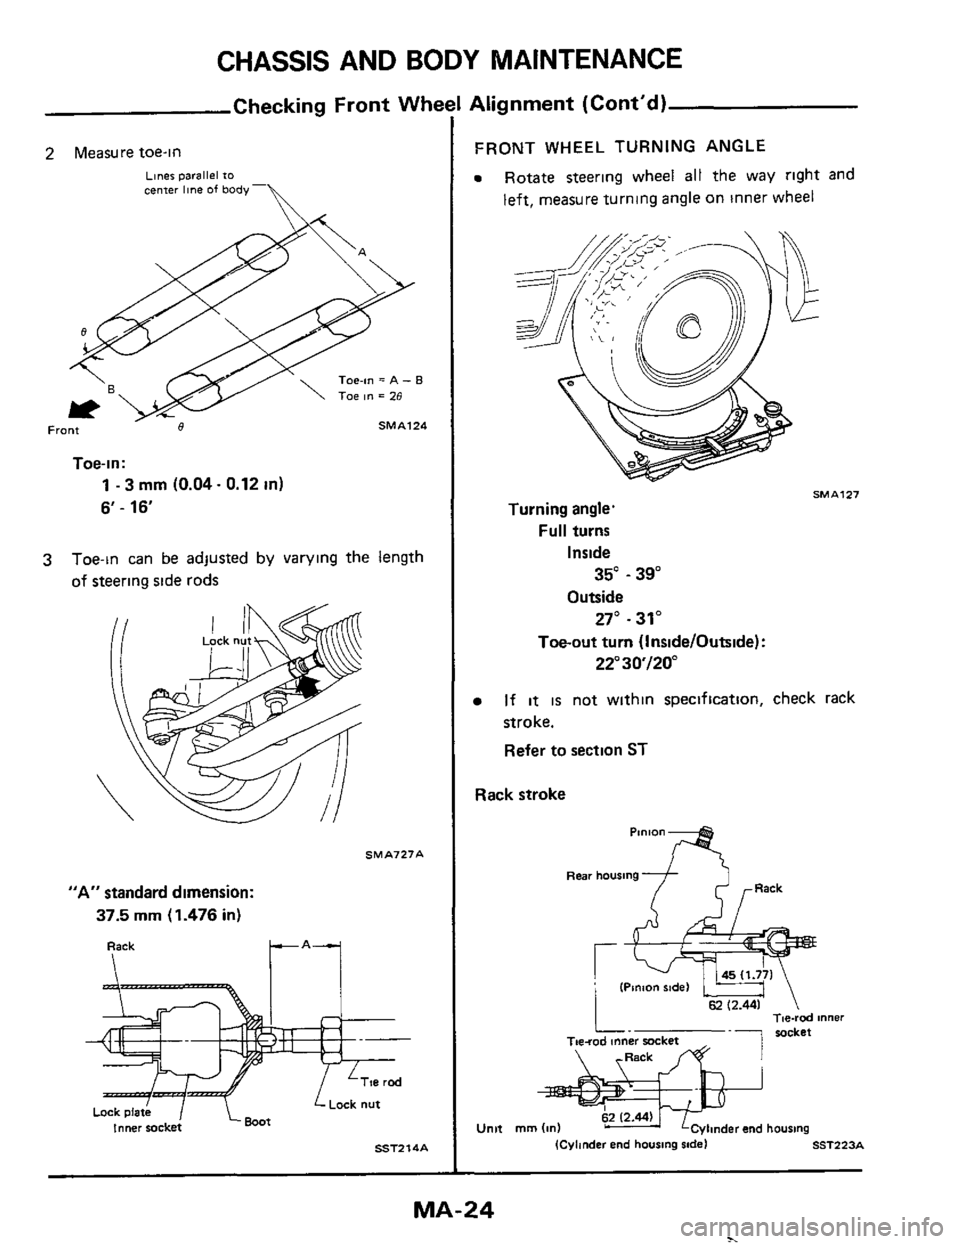 NISSAN 300ZX 1984 Z31 Maintenance Owners Manual CHASSIS AND BODY  MAINTENANCE 
Checking  Front Whe 
2 Measure toe-in 
Liner parallel to center line of body- 
Toe-in = A - 8 
SMA124 Front 
Toe-in: 
1 - 3 mm (0.04. 0.12 in) 
6-16 
3 Town can be adjus